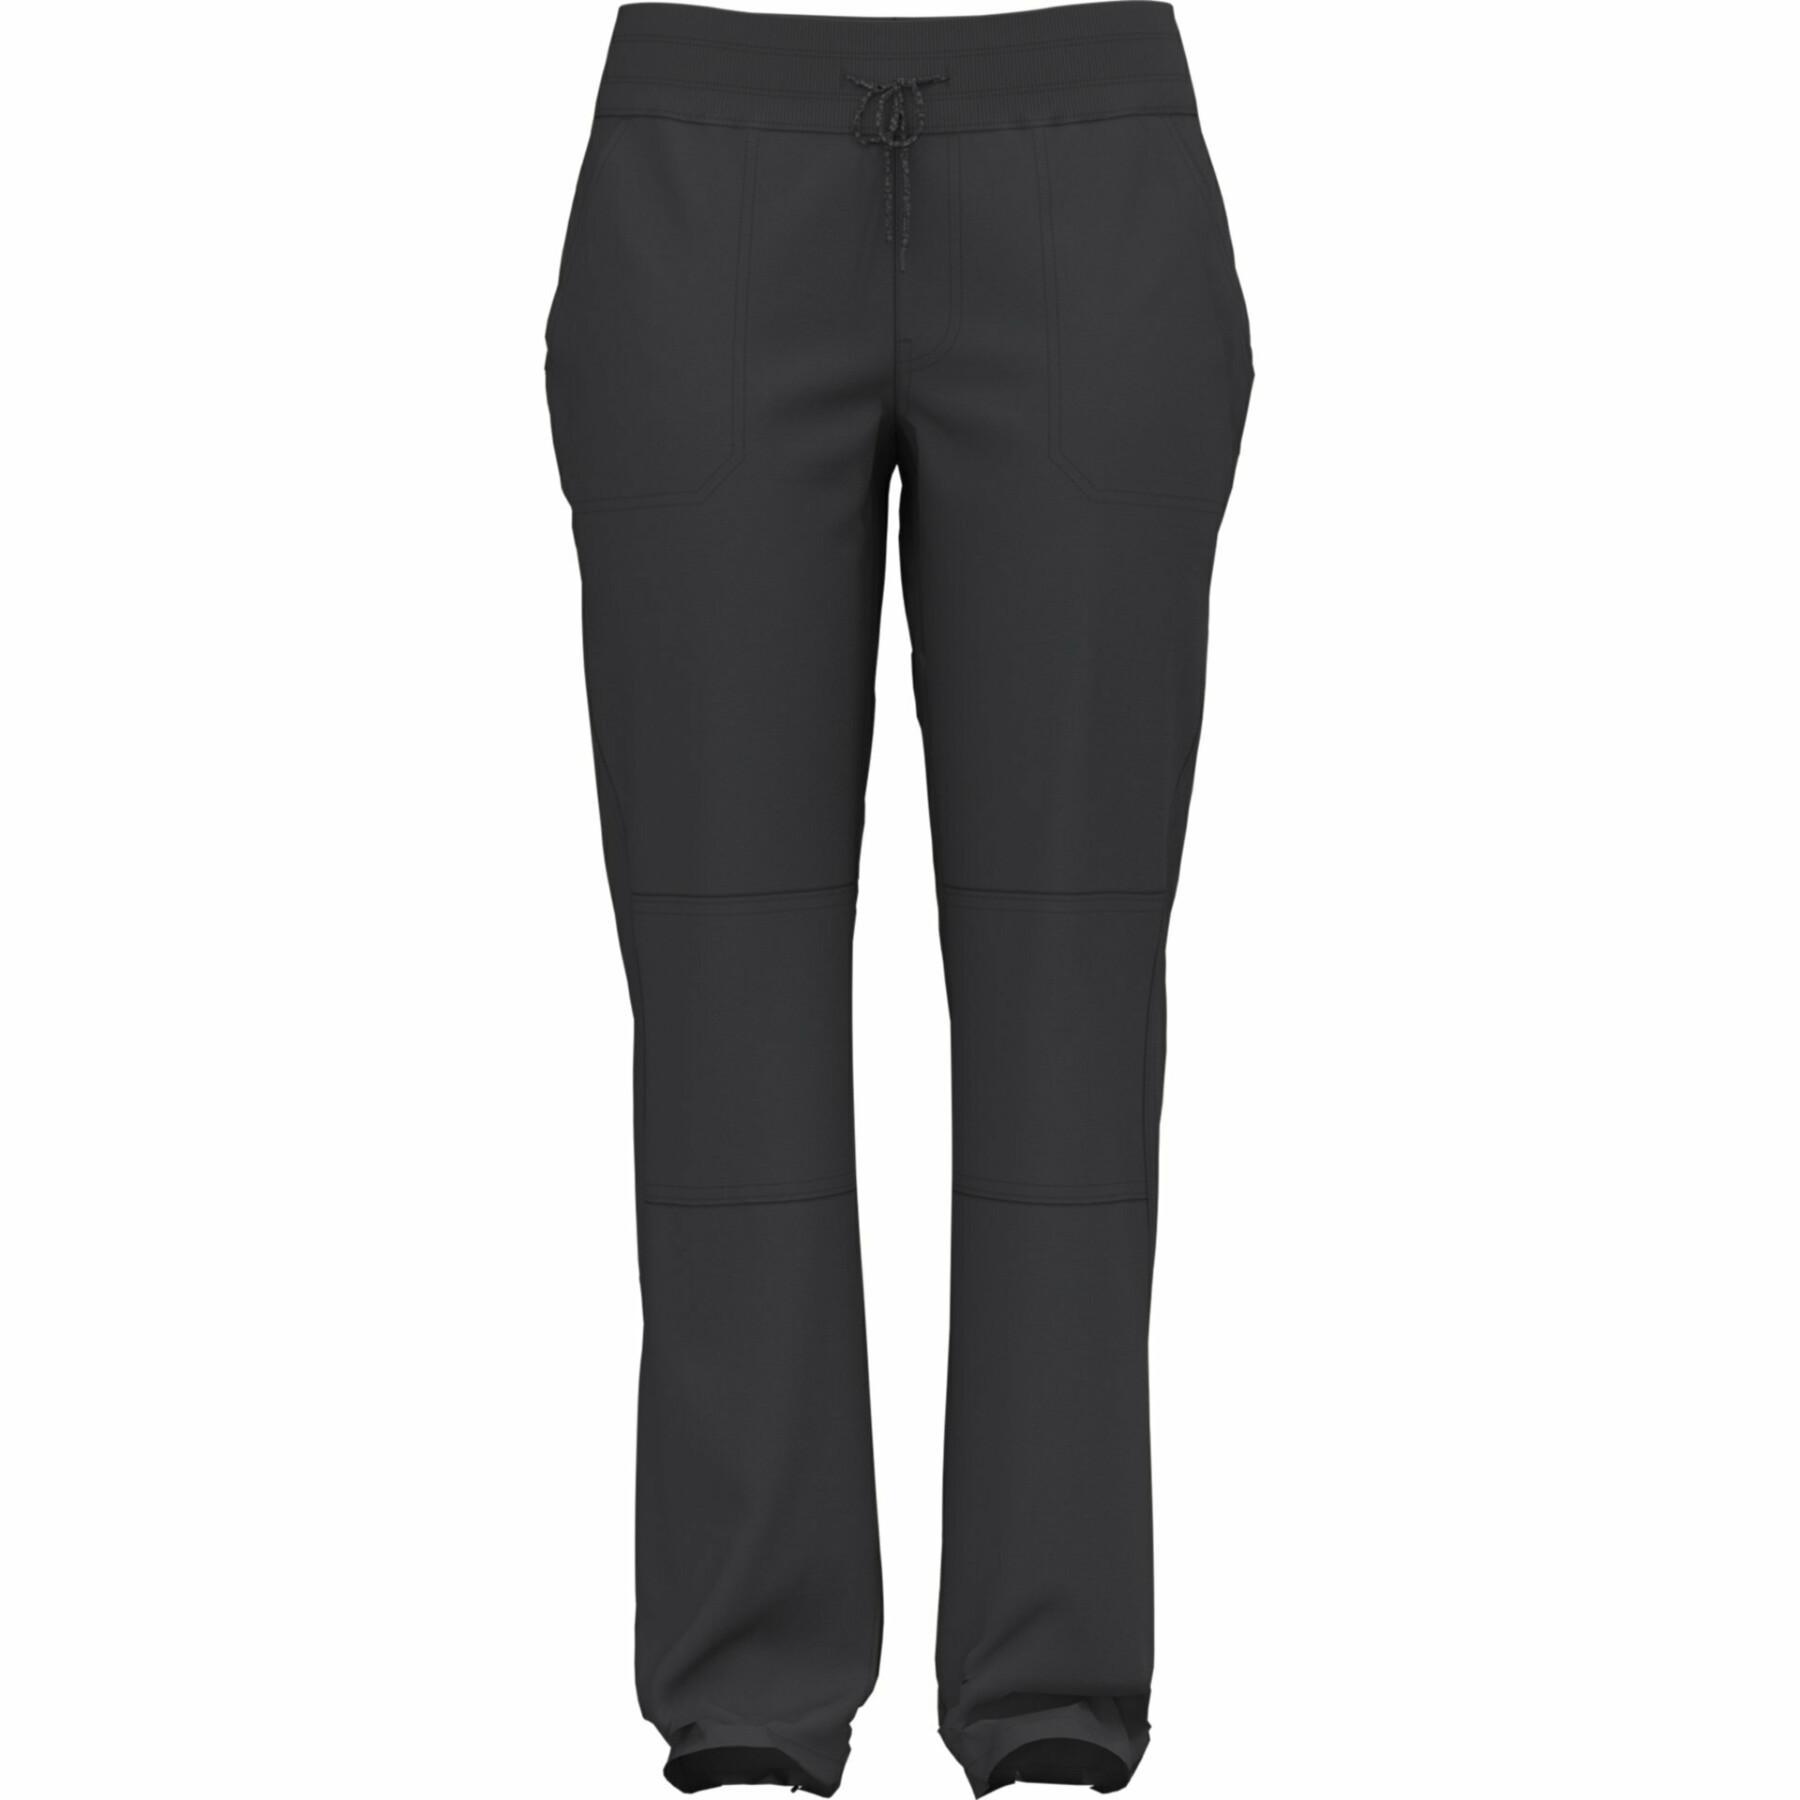 Women's trousers The North Face Aphrodite Motion